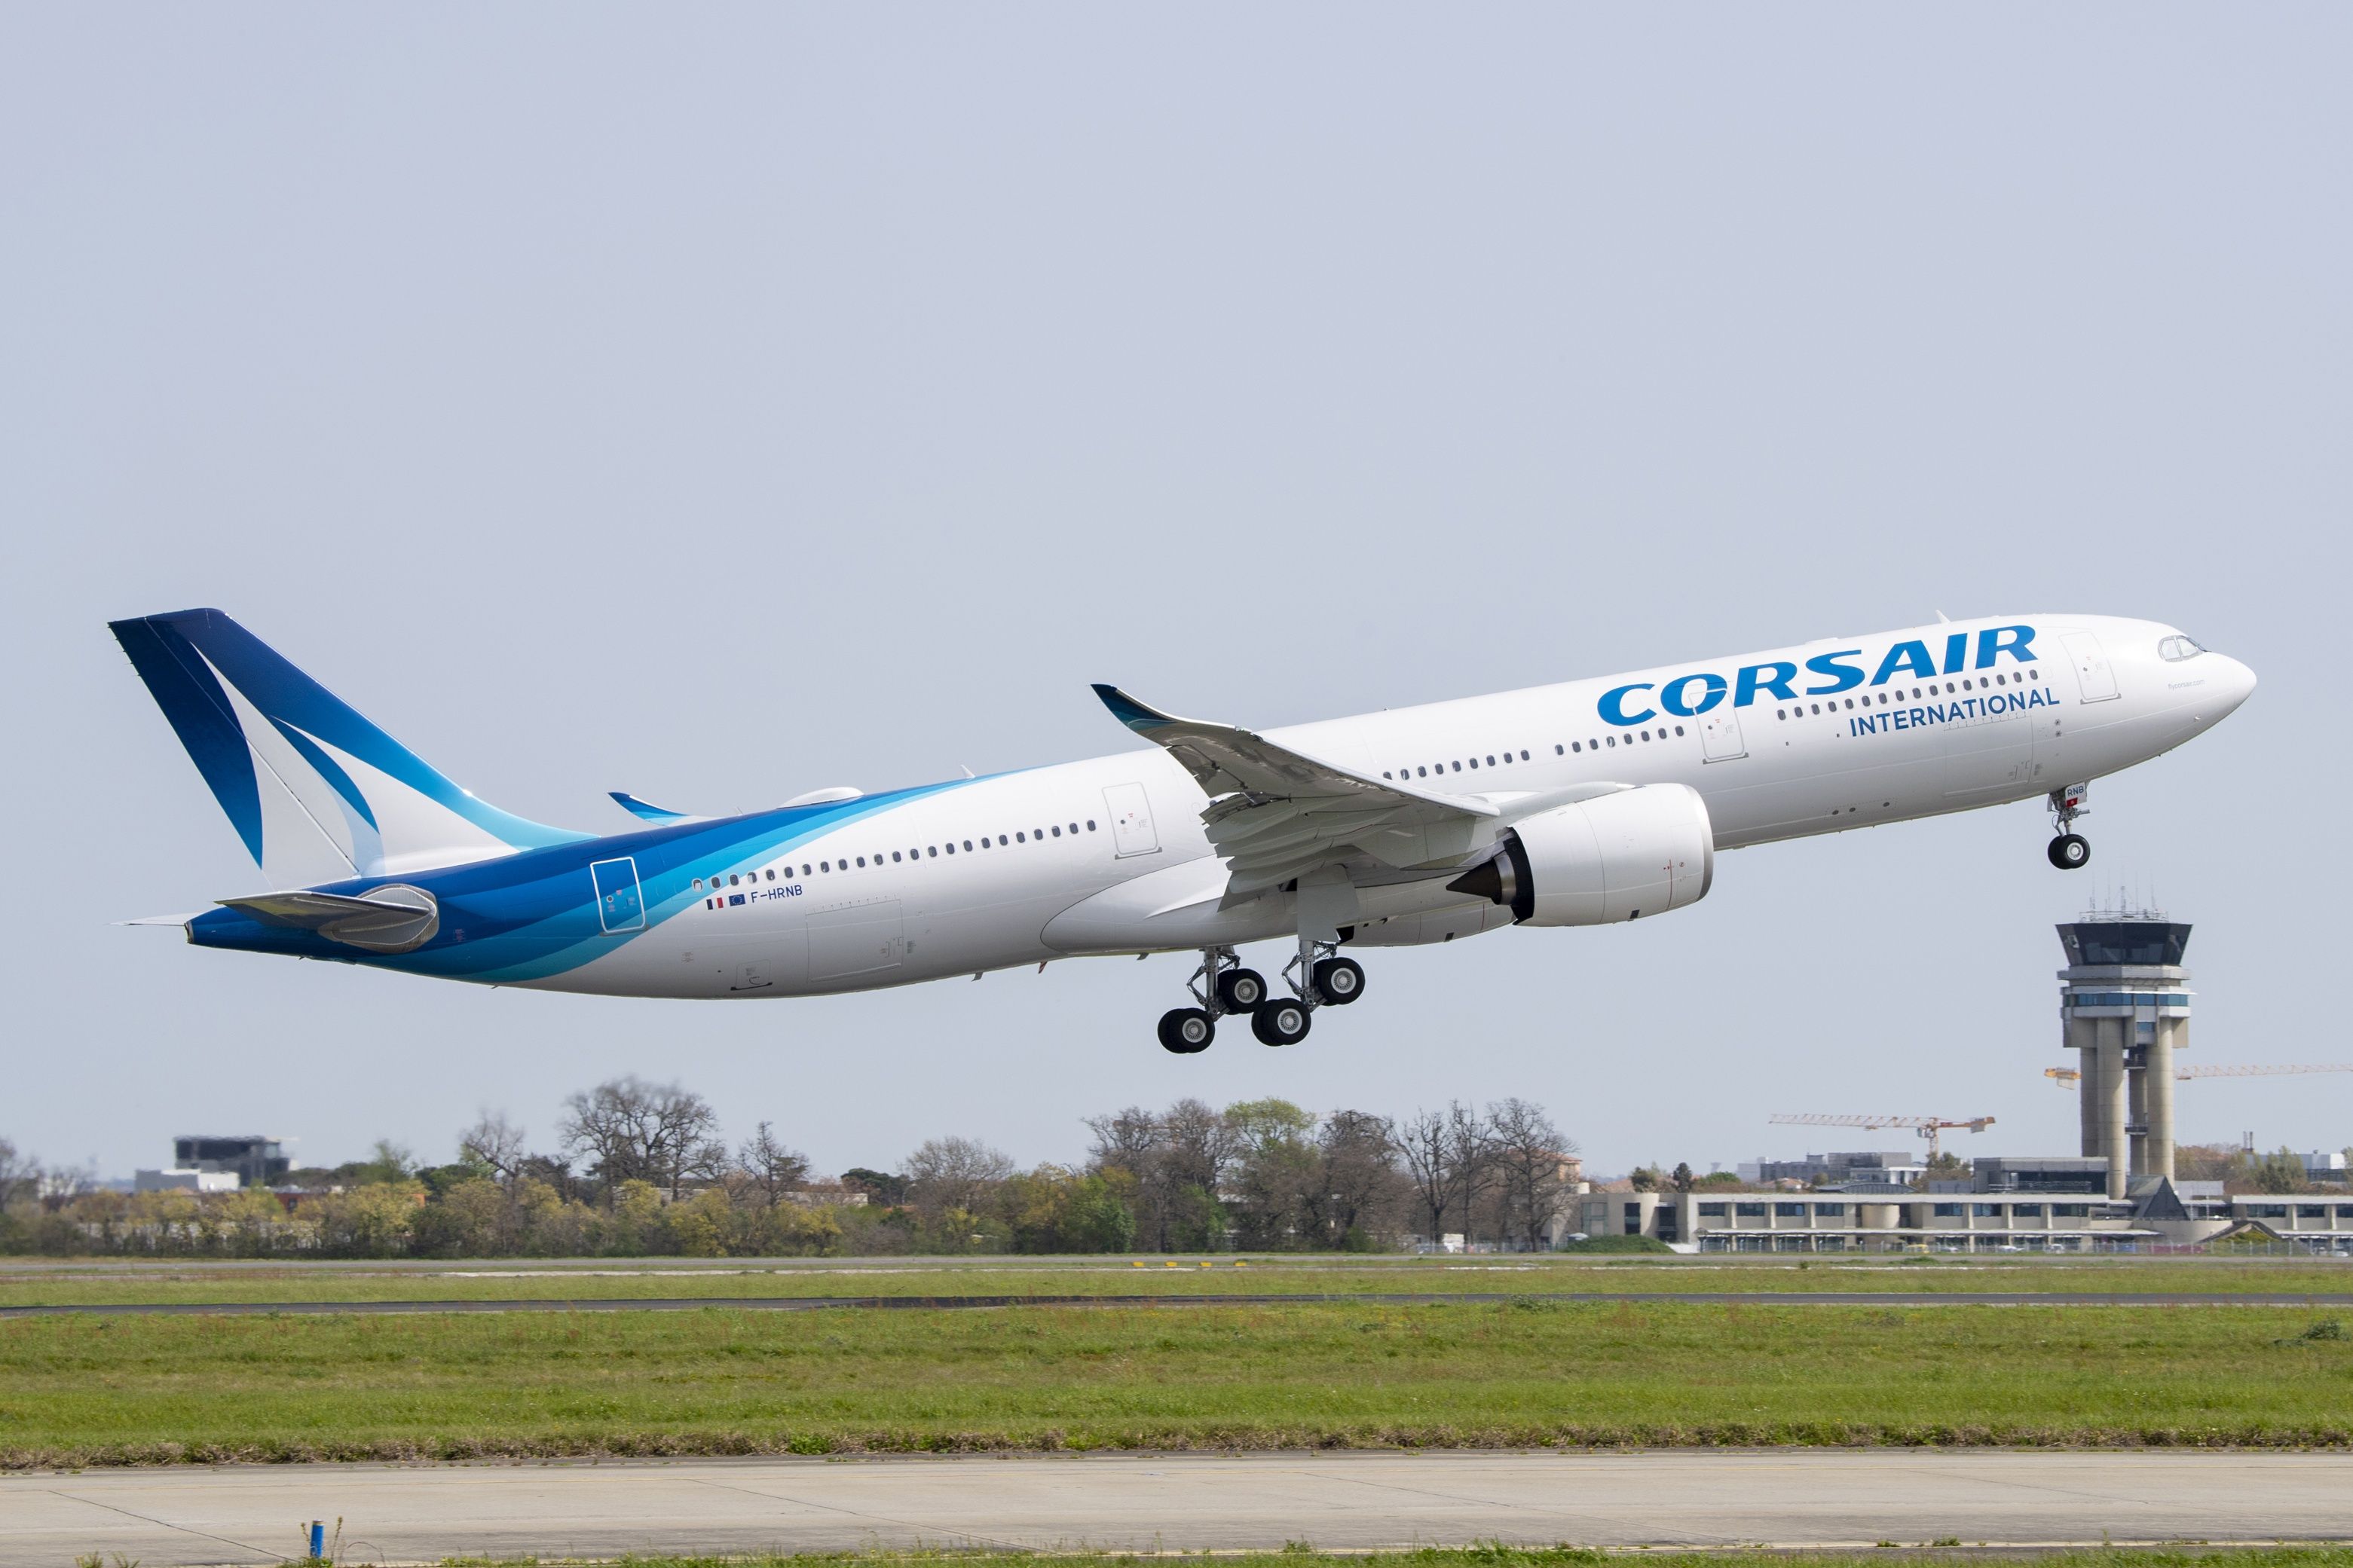 Corsair Airbus A330neo taking off